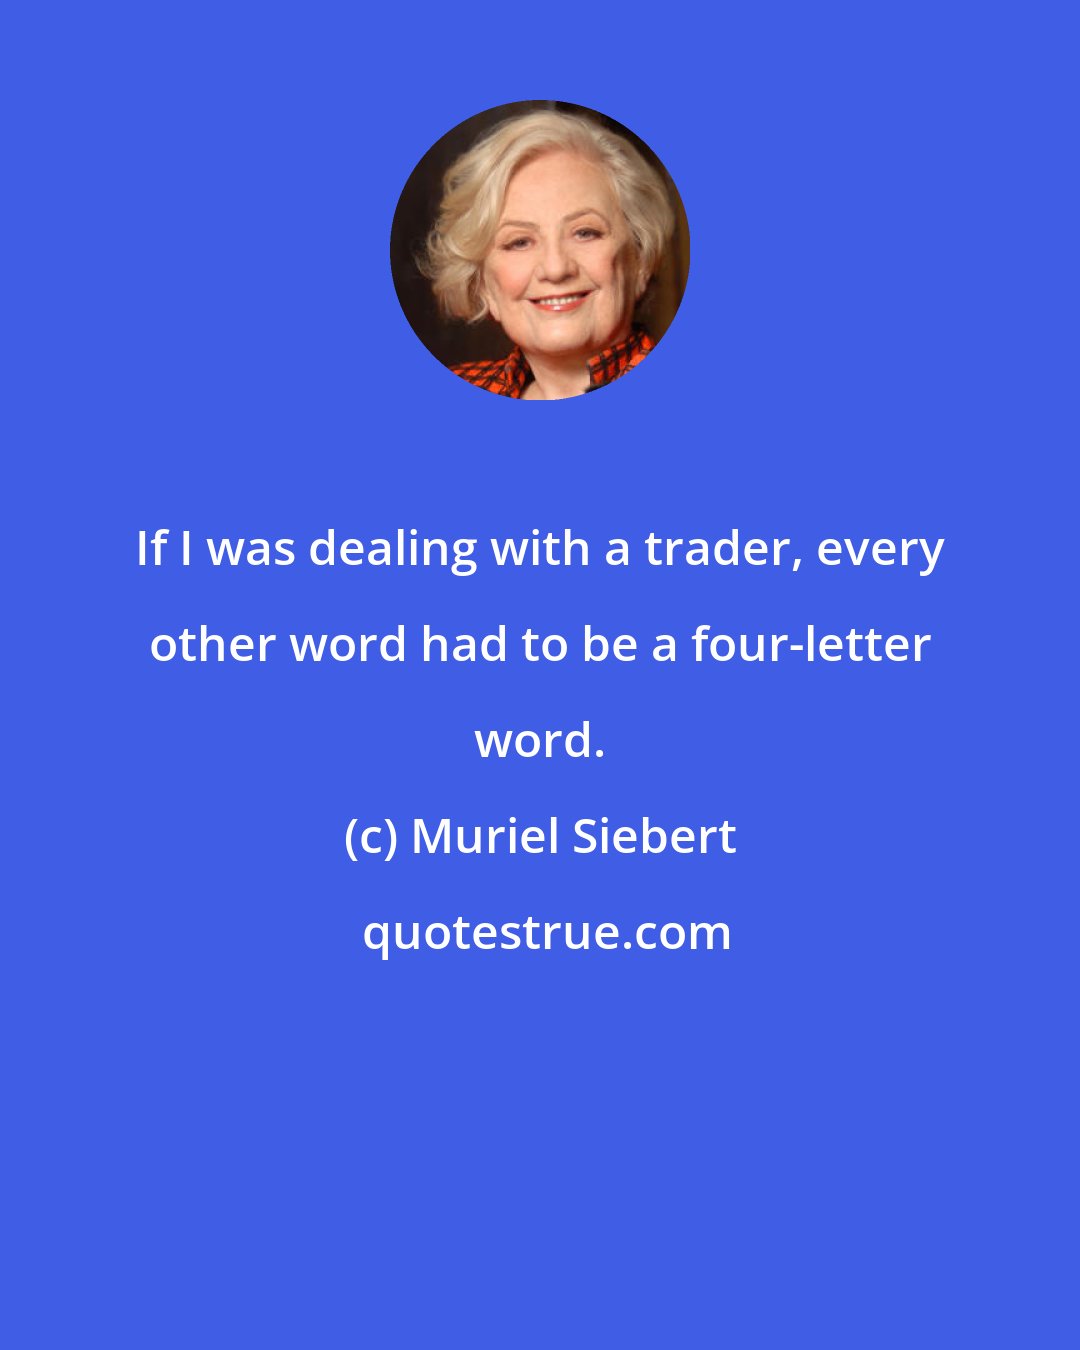 Muriel Siebert: If I was dealing with a trader, every other word had to be a four-letter word.